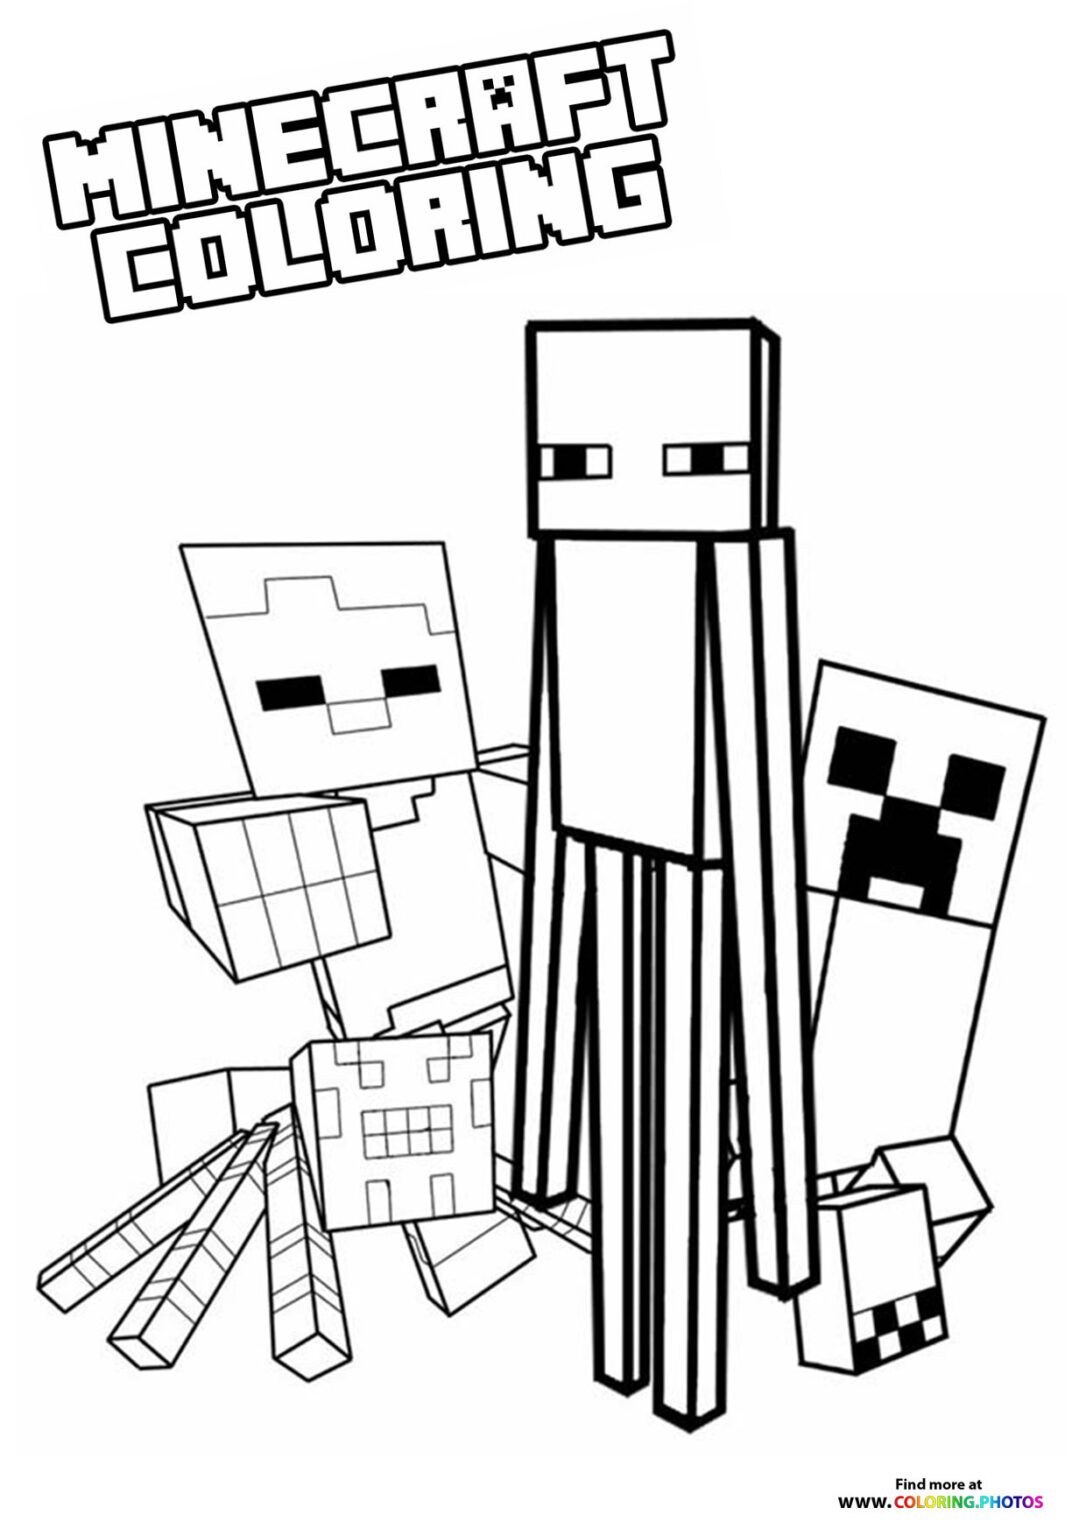 Minecraft enemys - Coloring Pages for kids.